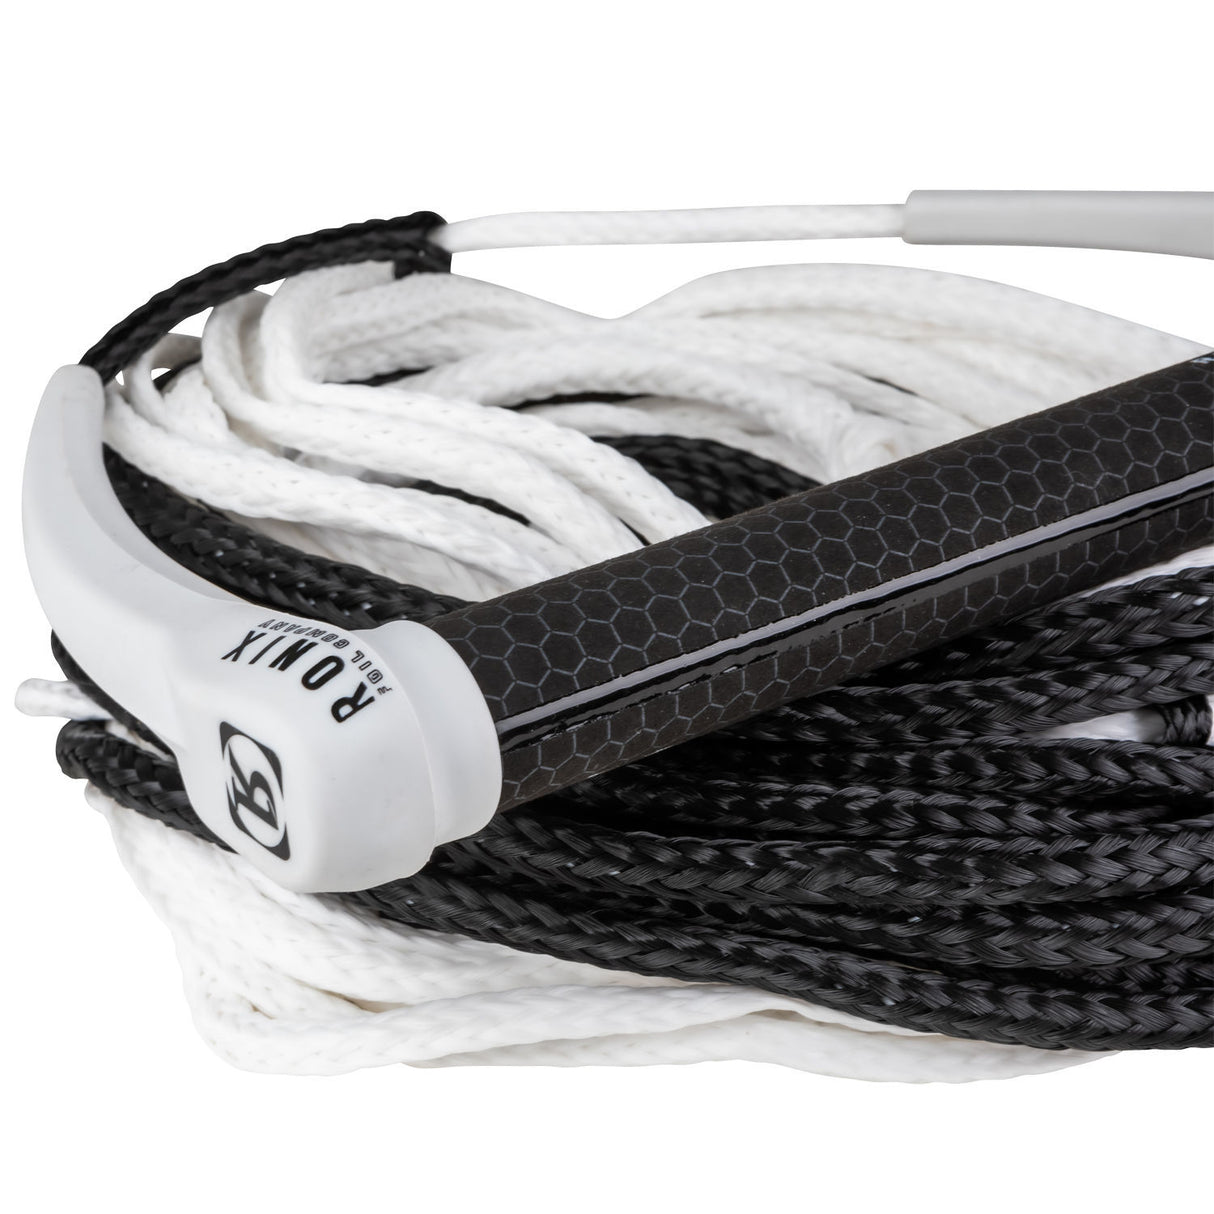 Ronix 727 Foil Combo 13" Hide Grip w/72.5' 10-Section Rope - White/Black